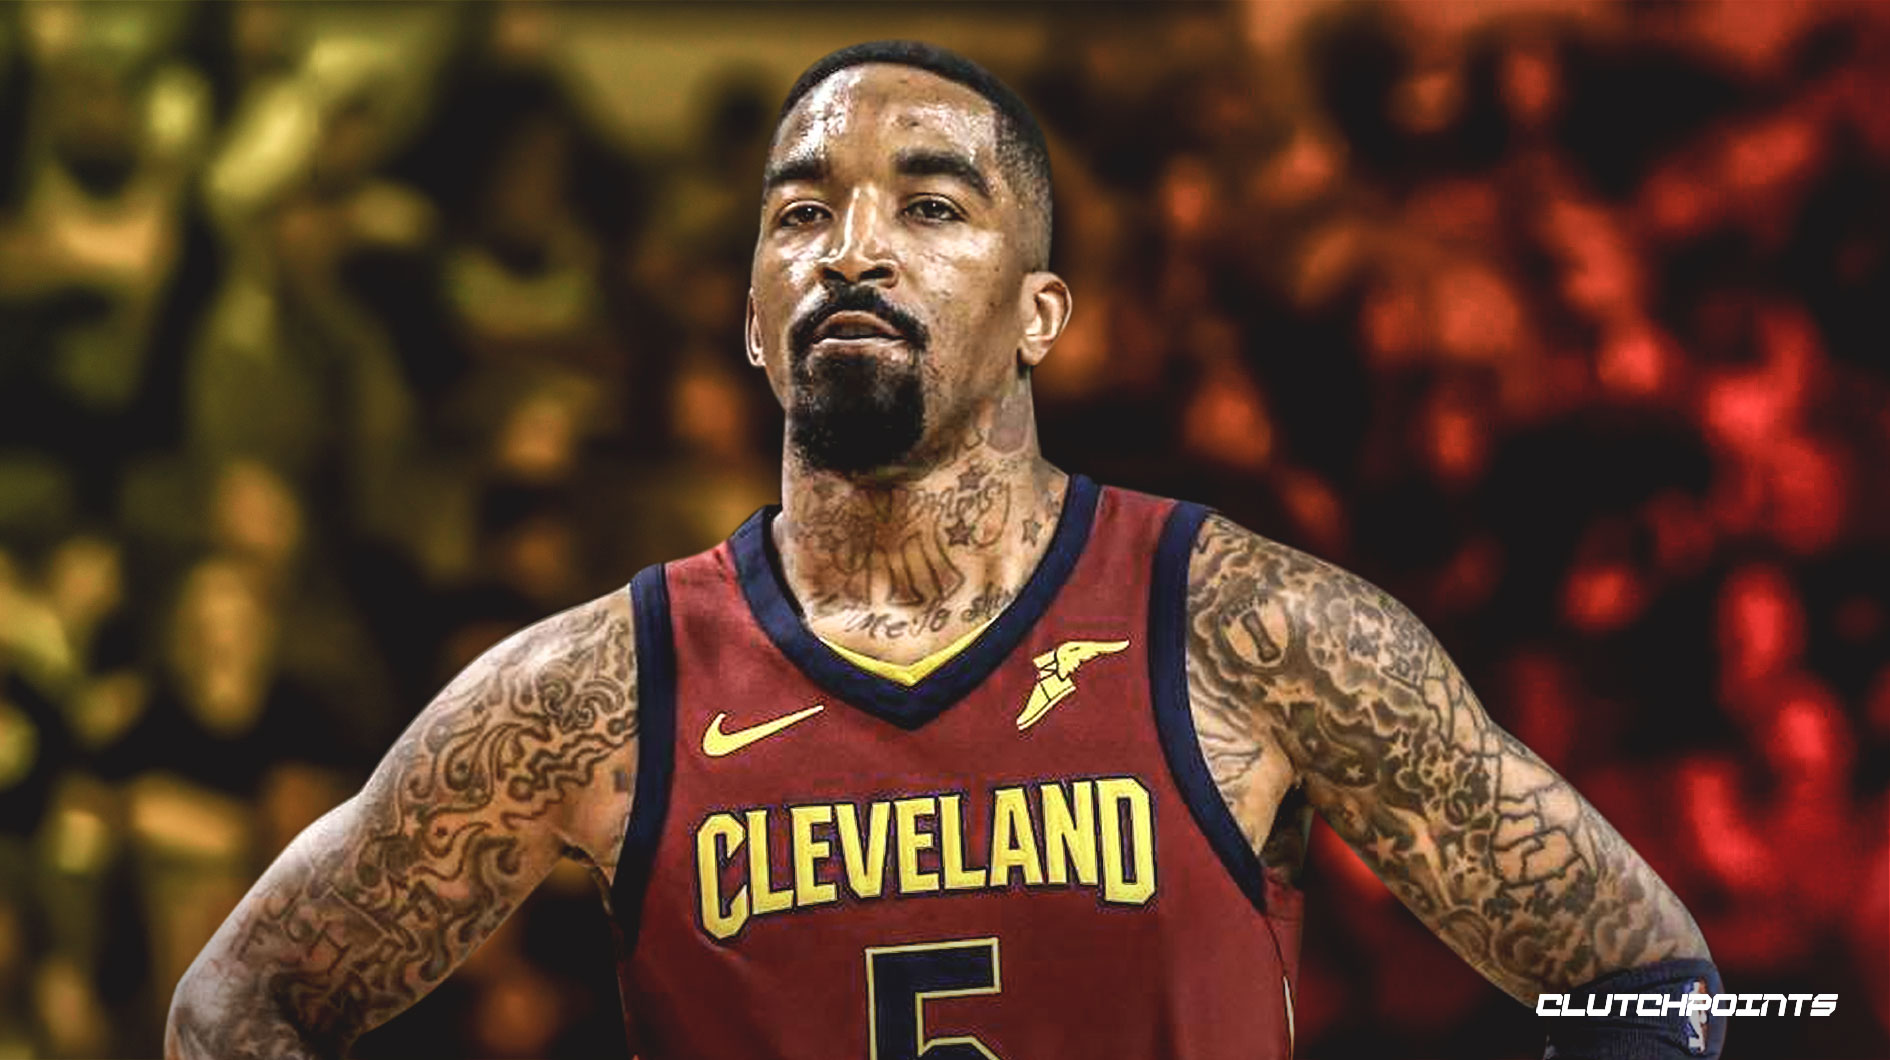 J.R. Smith of Cleveland Cavaliers ejected for cheap shot on Boston